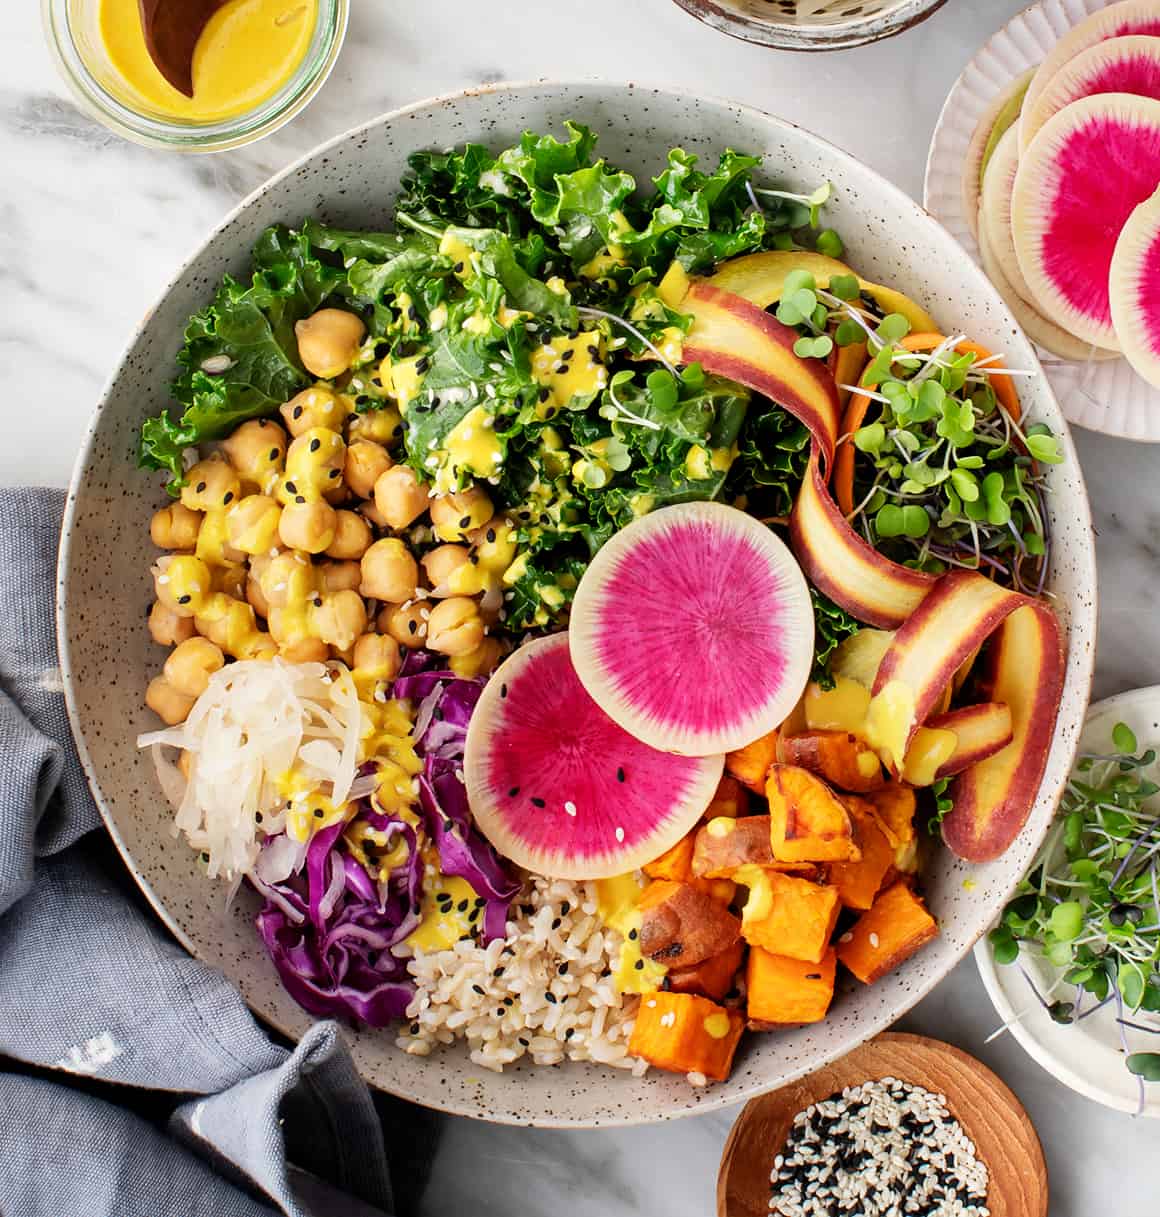 A color photo of a Buddha bowl, featuring rice, chick peas and vegetables.